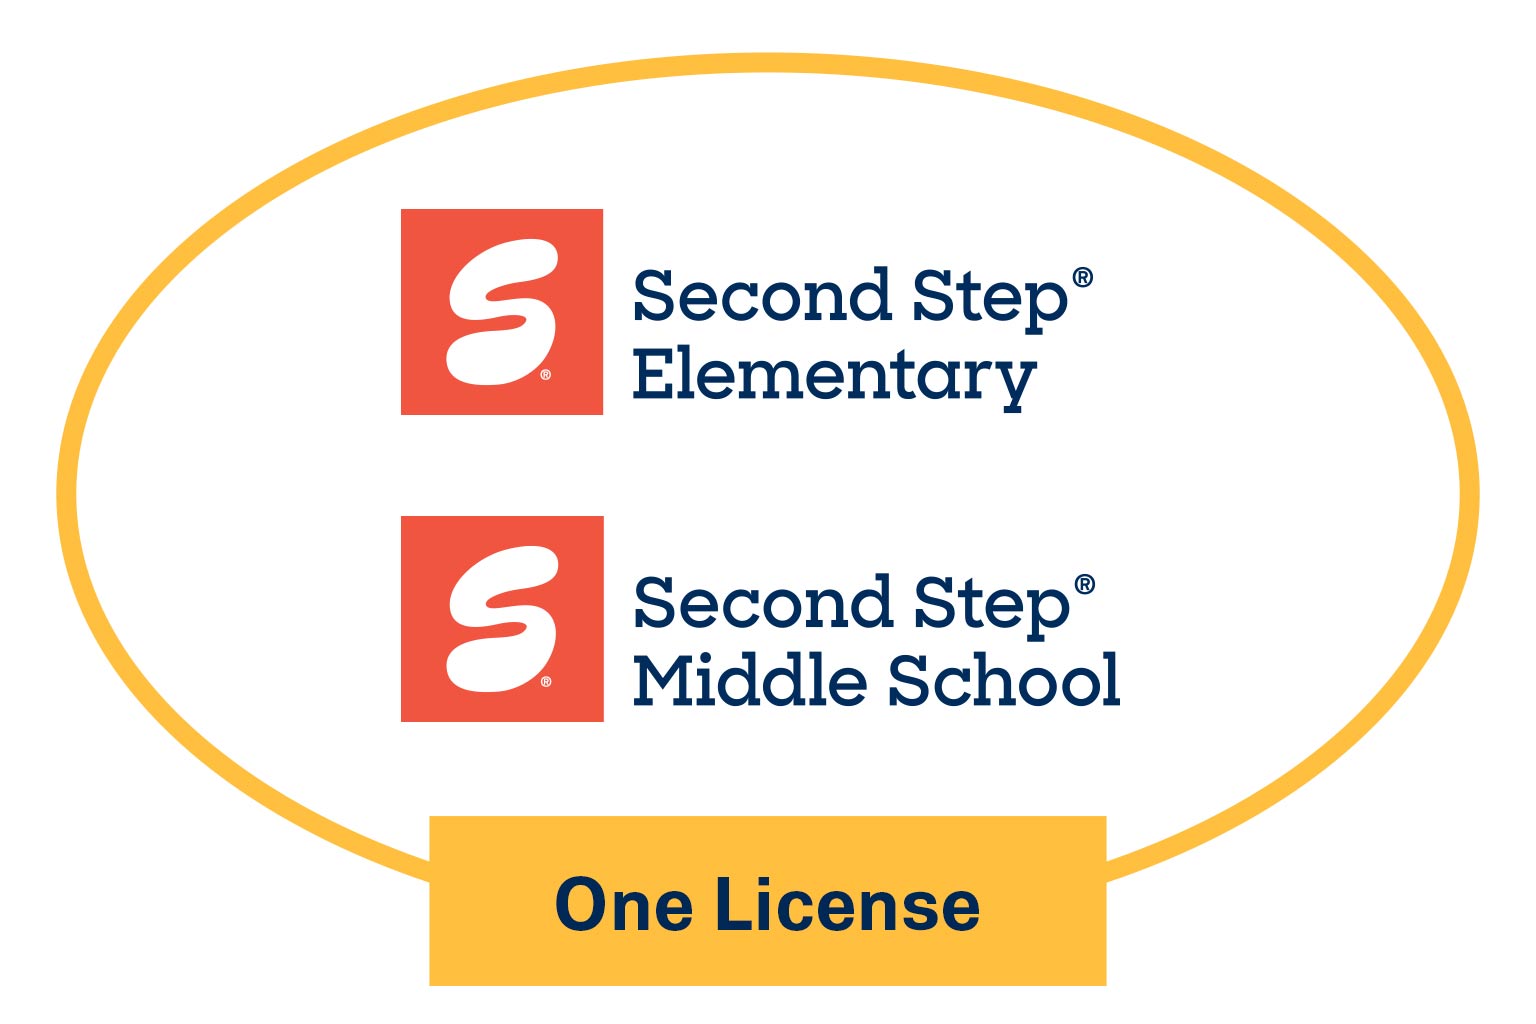 Second Step Elementary and Second Step Middle School, bundled with one license.